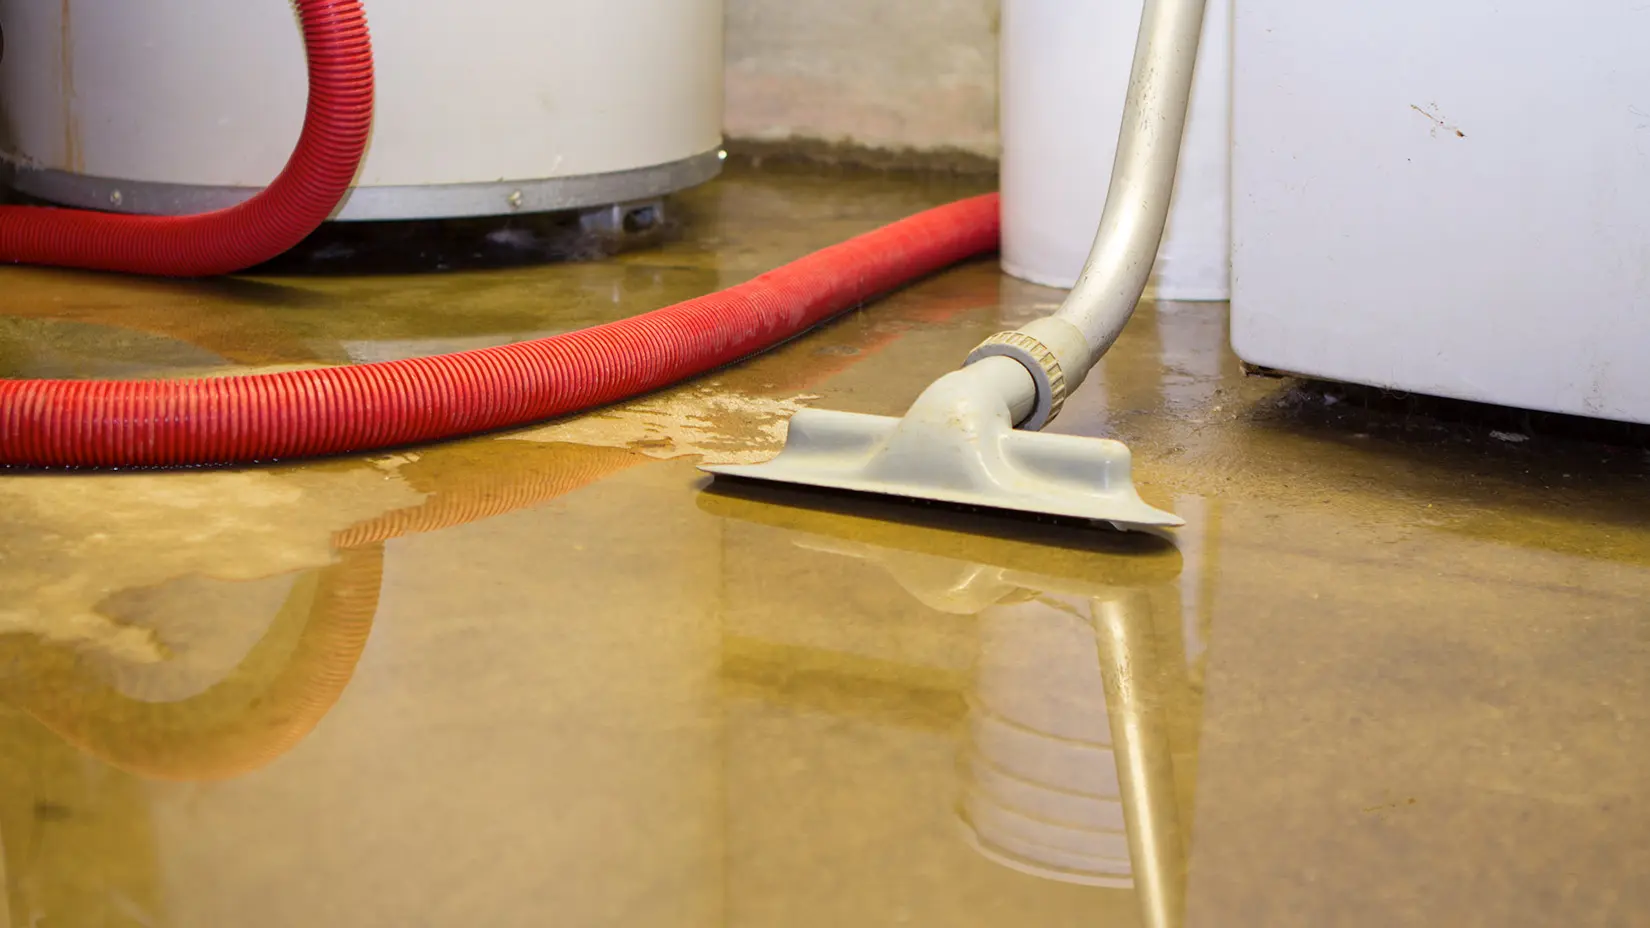  Floodwater in a basement is removed using a water vacuum.